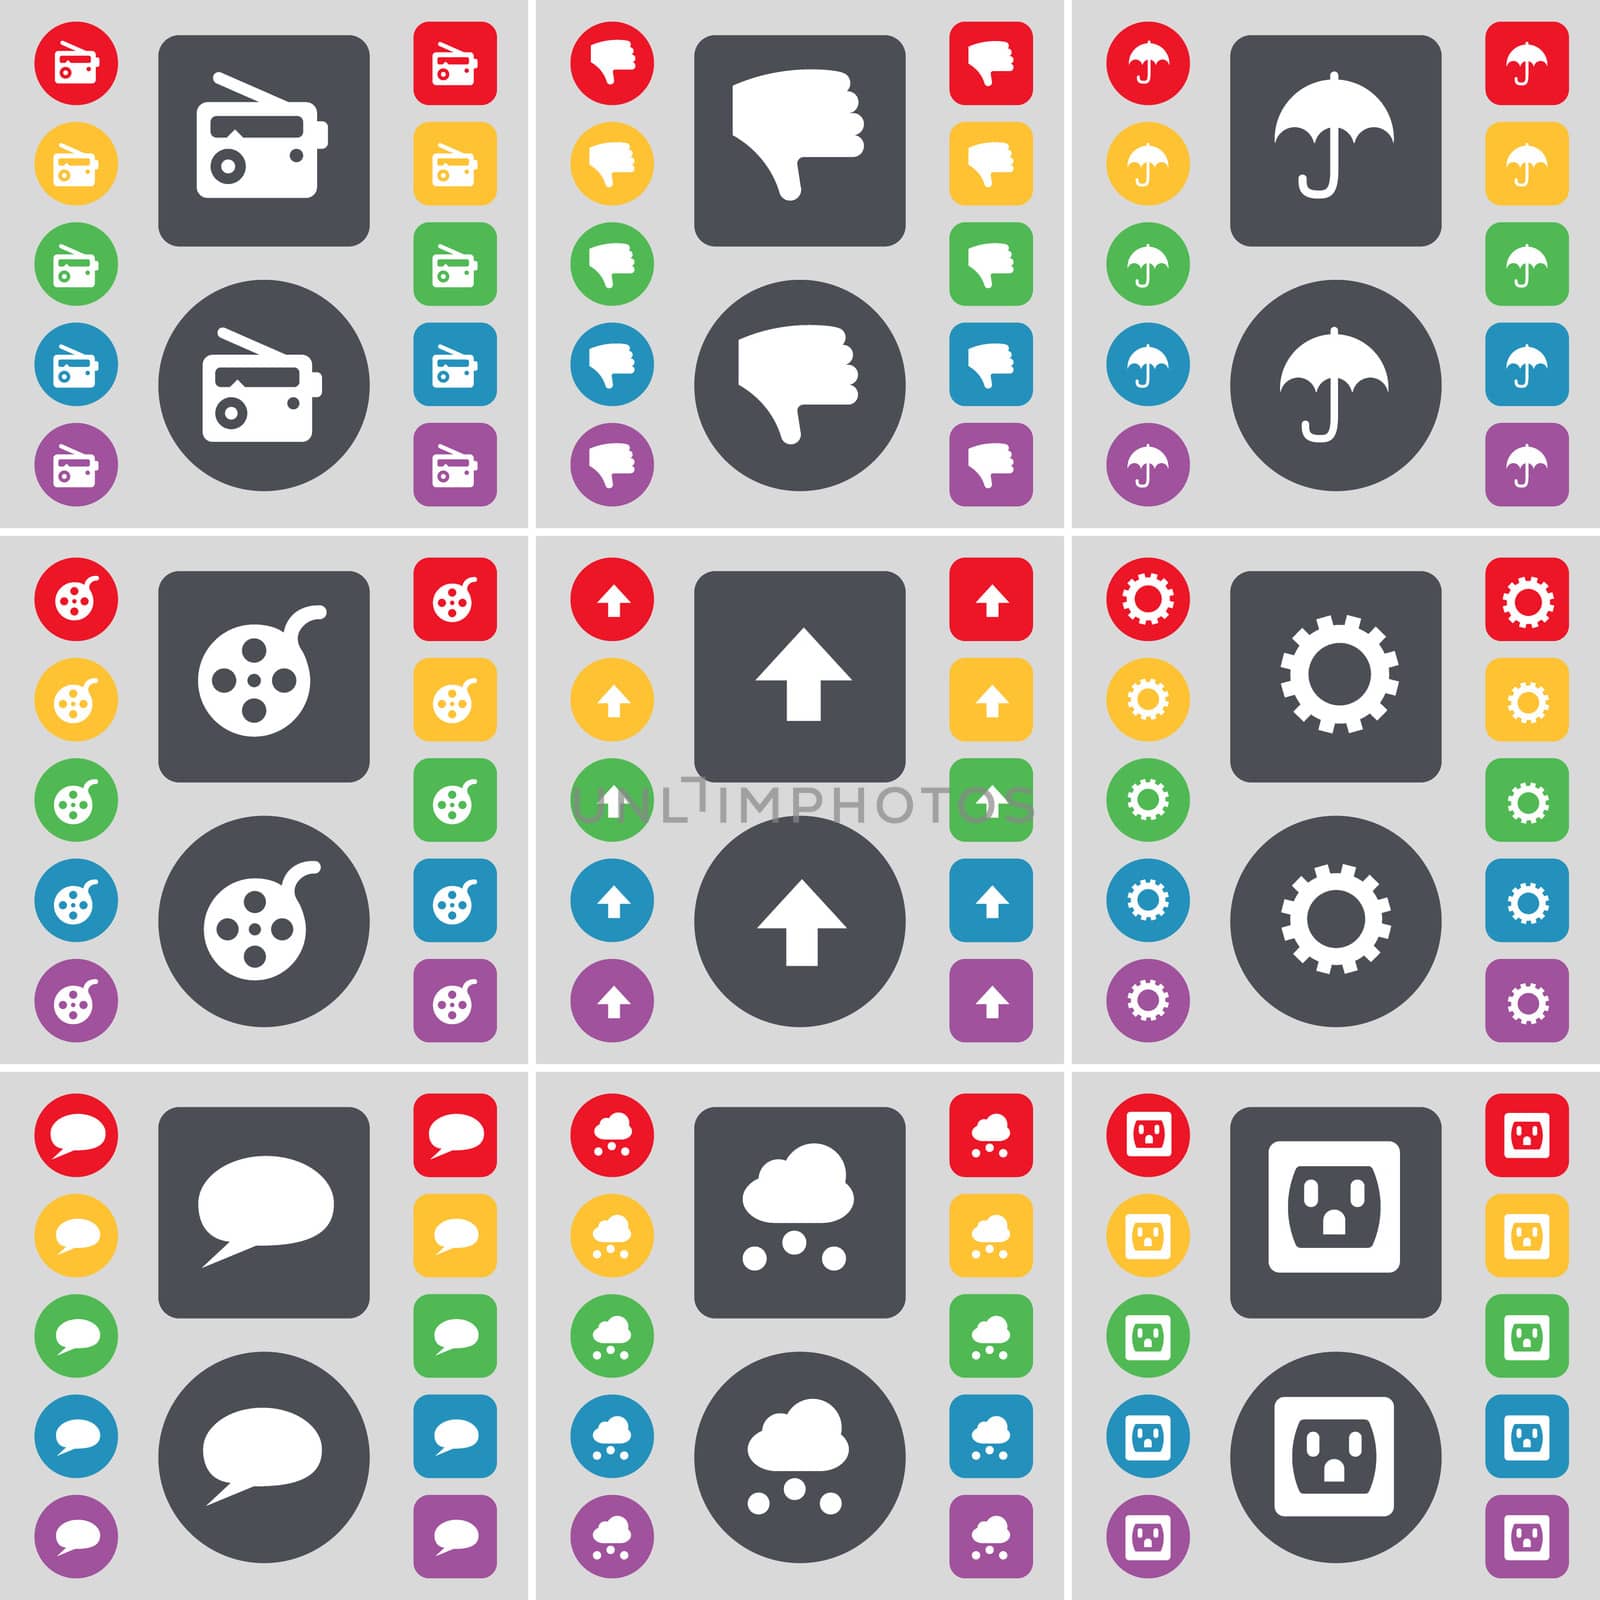 Radio, Dislike, Umbrella, Videotape, Arrow up, Gear, Chat bubble, Cloud, Socket icon symbol. A large set of flat, colored buttons for your design. illustration